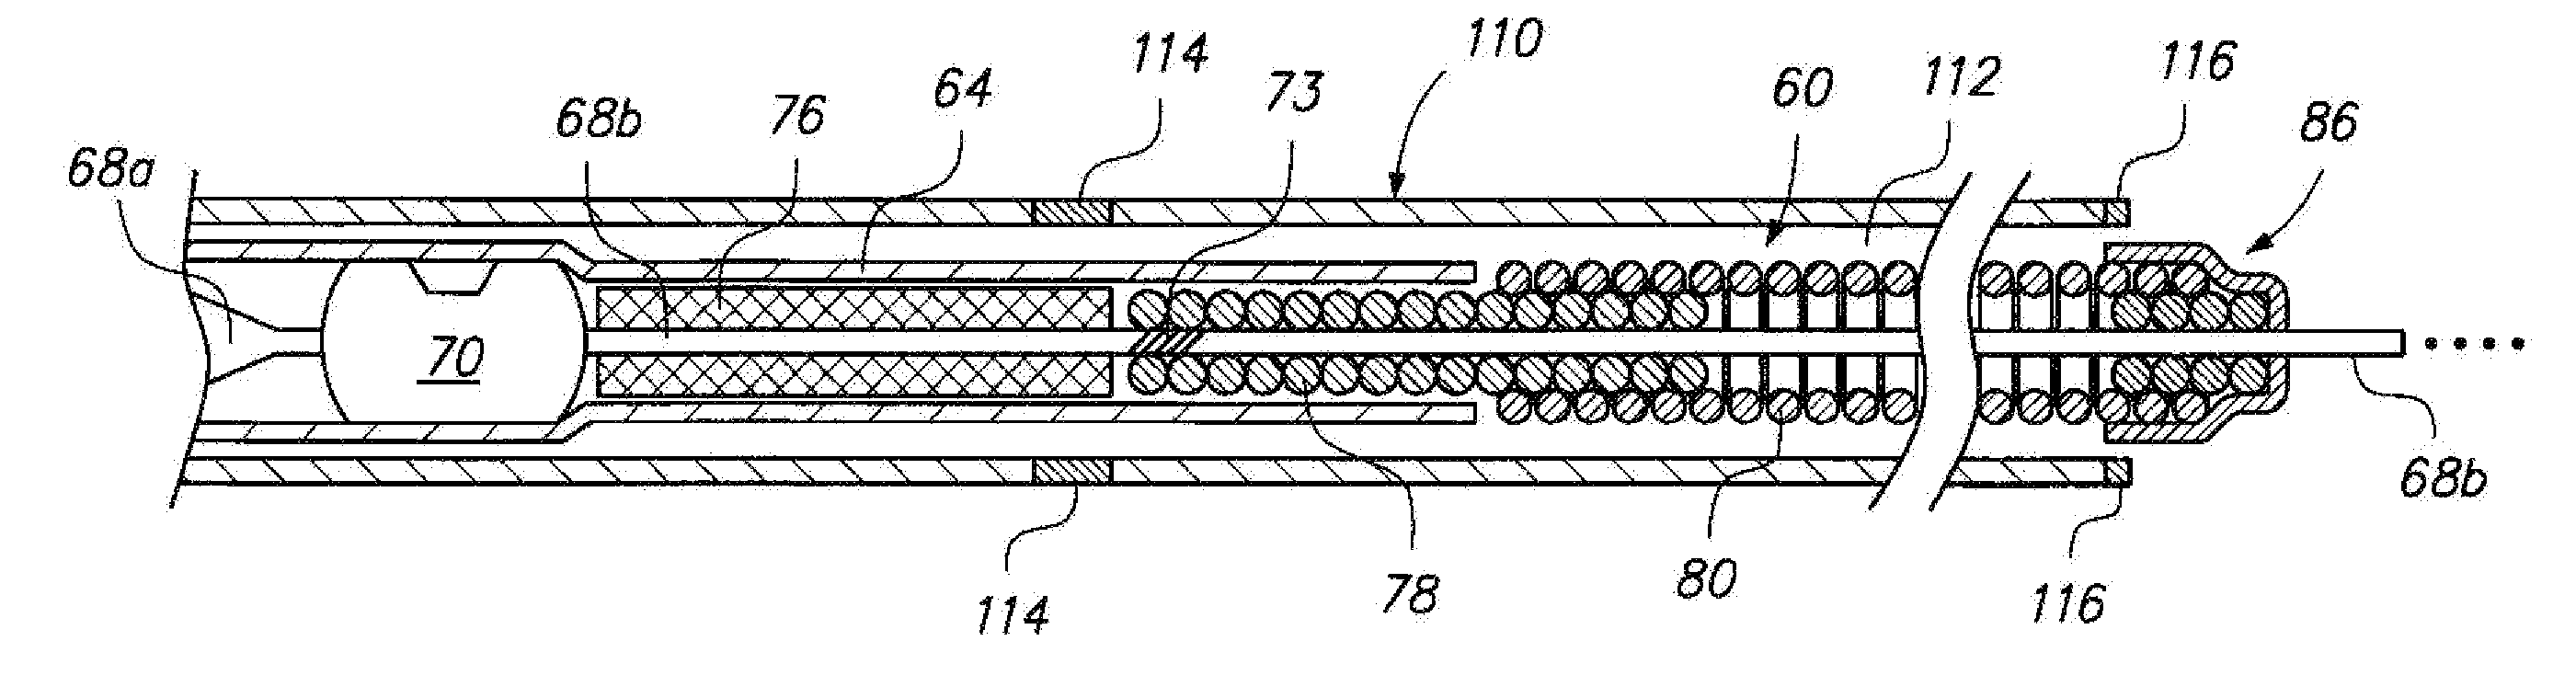 Vaso-occlusive delivery device with kink resistant, flexible distal end